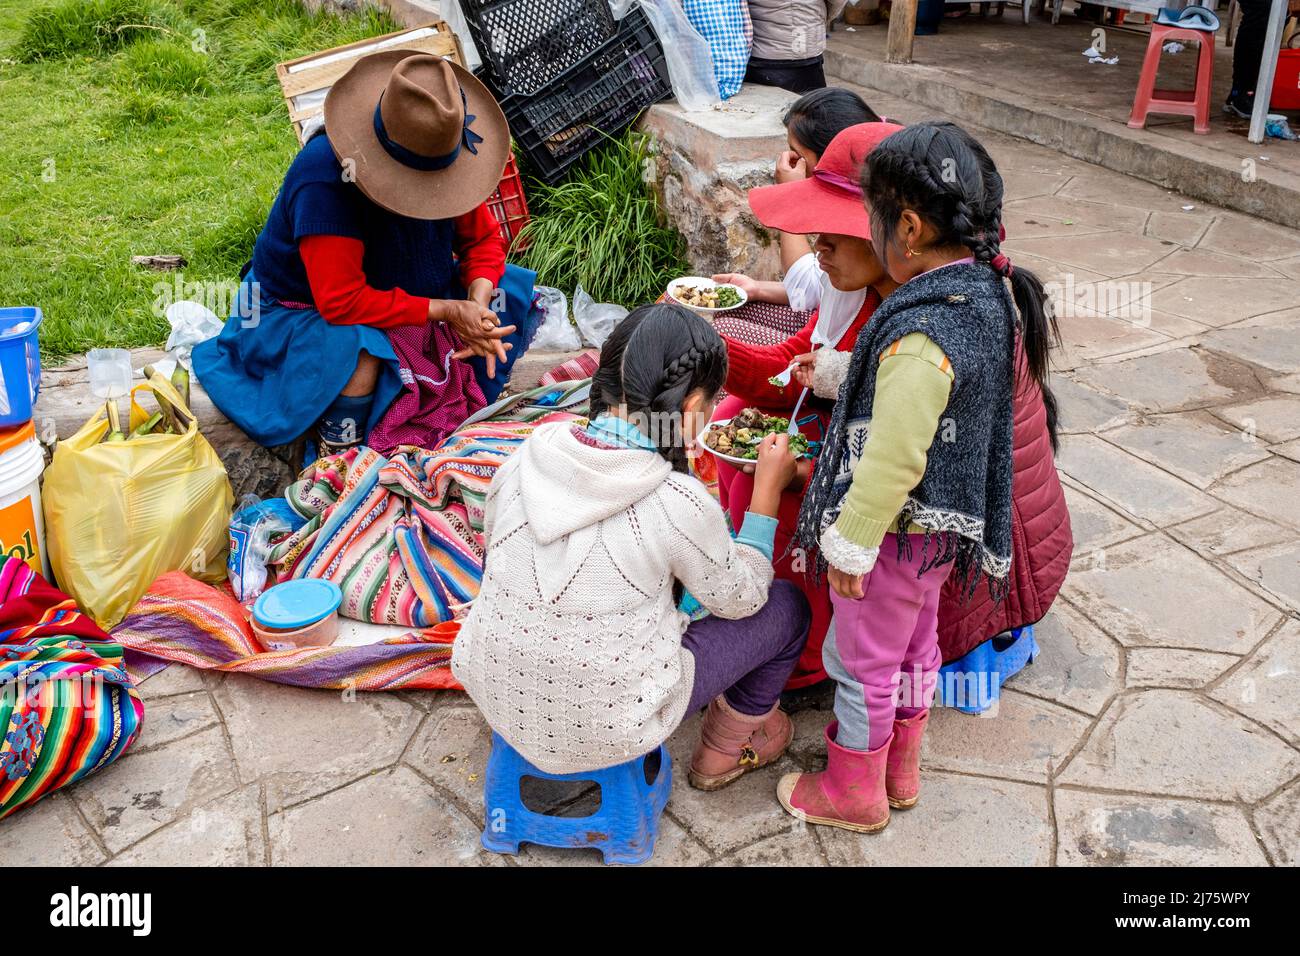 A Peruvian Family Eating A Meal At The Sunday Market In The Village Of Chinchero, The Sacred Valley, Urubamba Province, Peru. Stock Photo